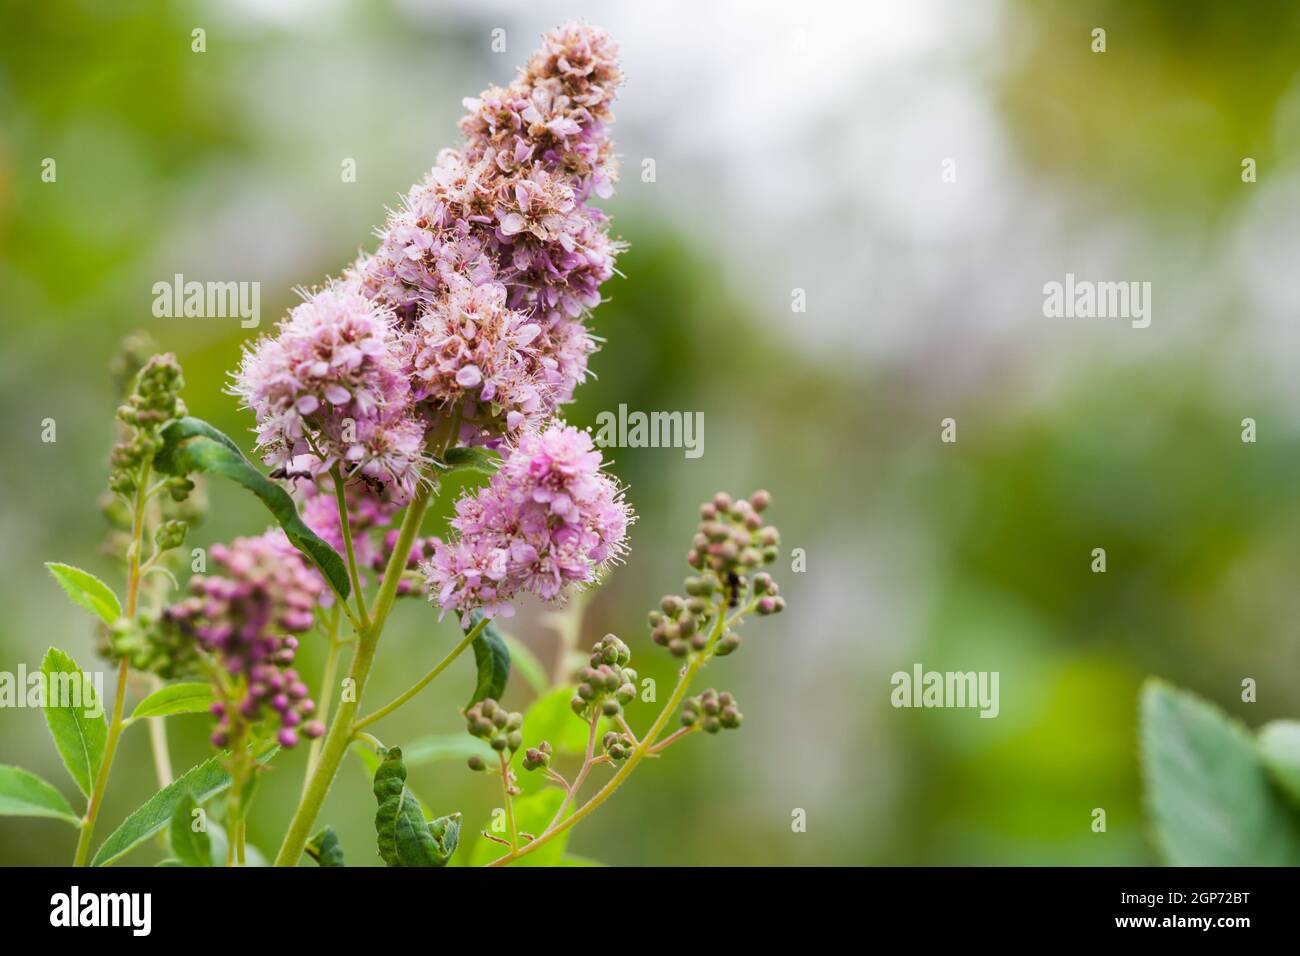 Pink flowers of the Spiraea douglasii. Flowering plant in the rose family native to western North America Stock Photo